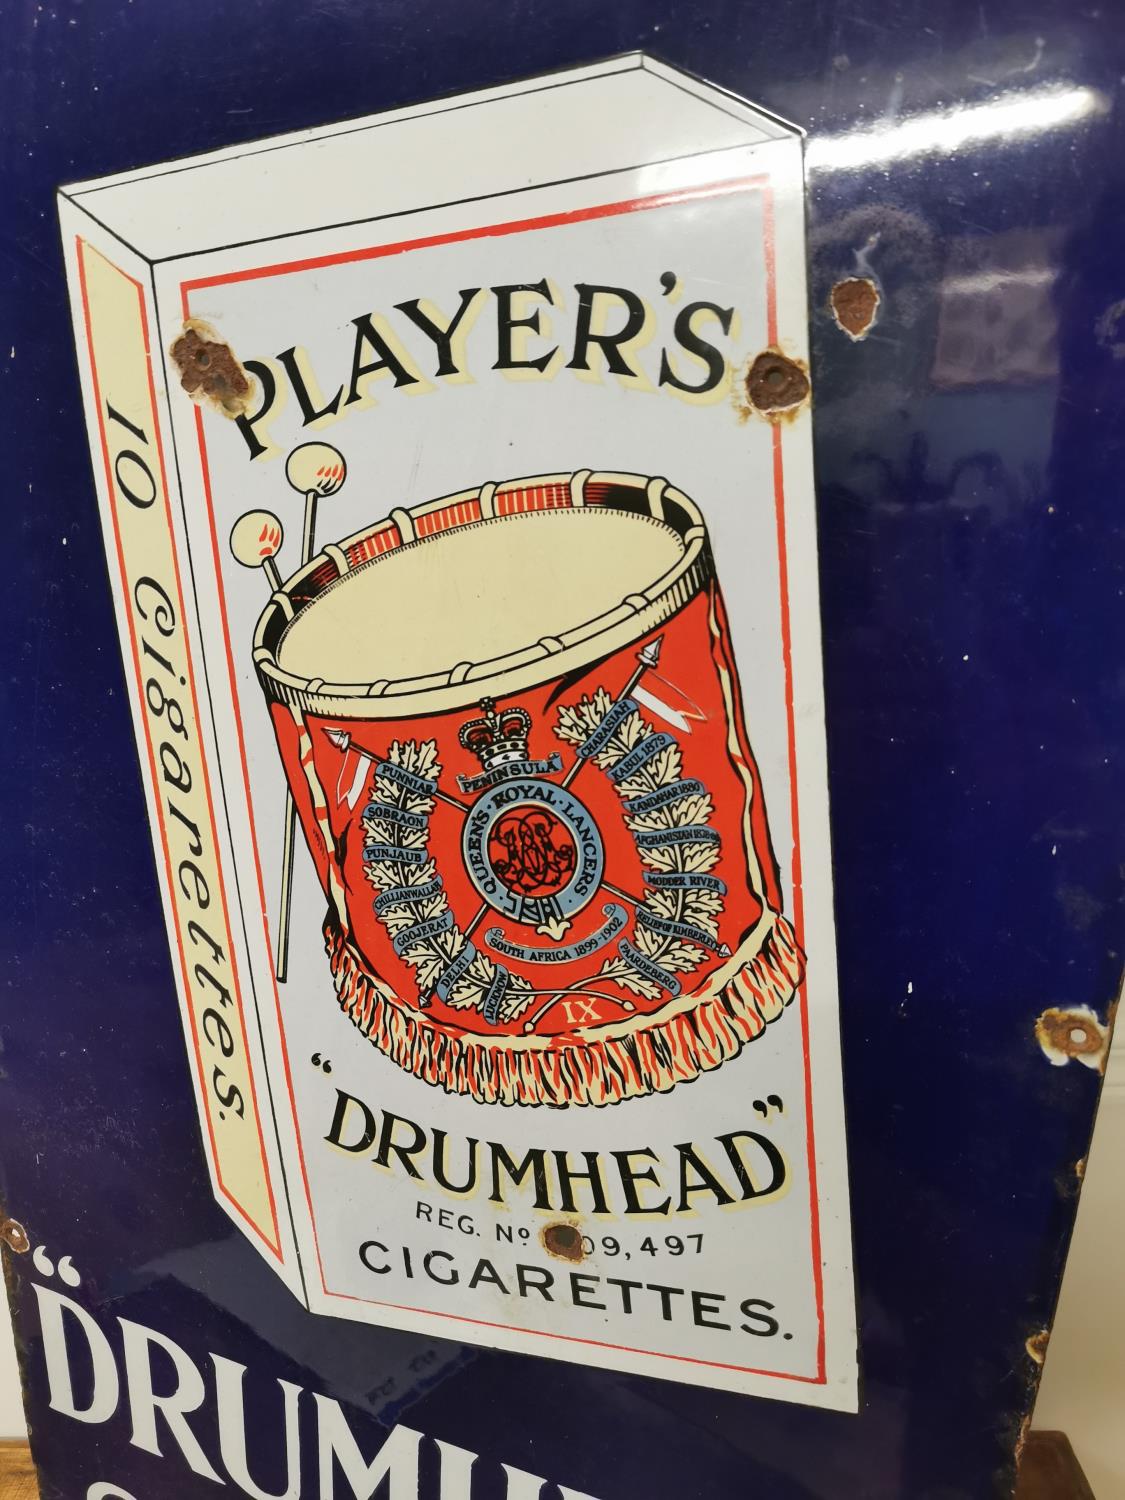 Players Drumhead Cigarettes pictorial enamel advertising sign. - Image 4 of 5